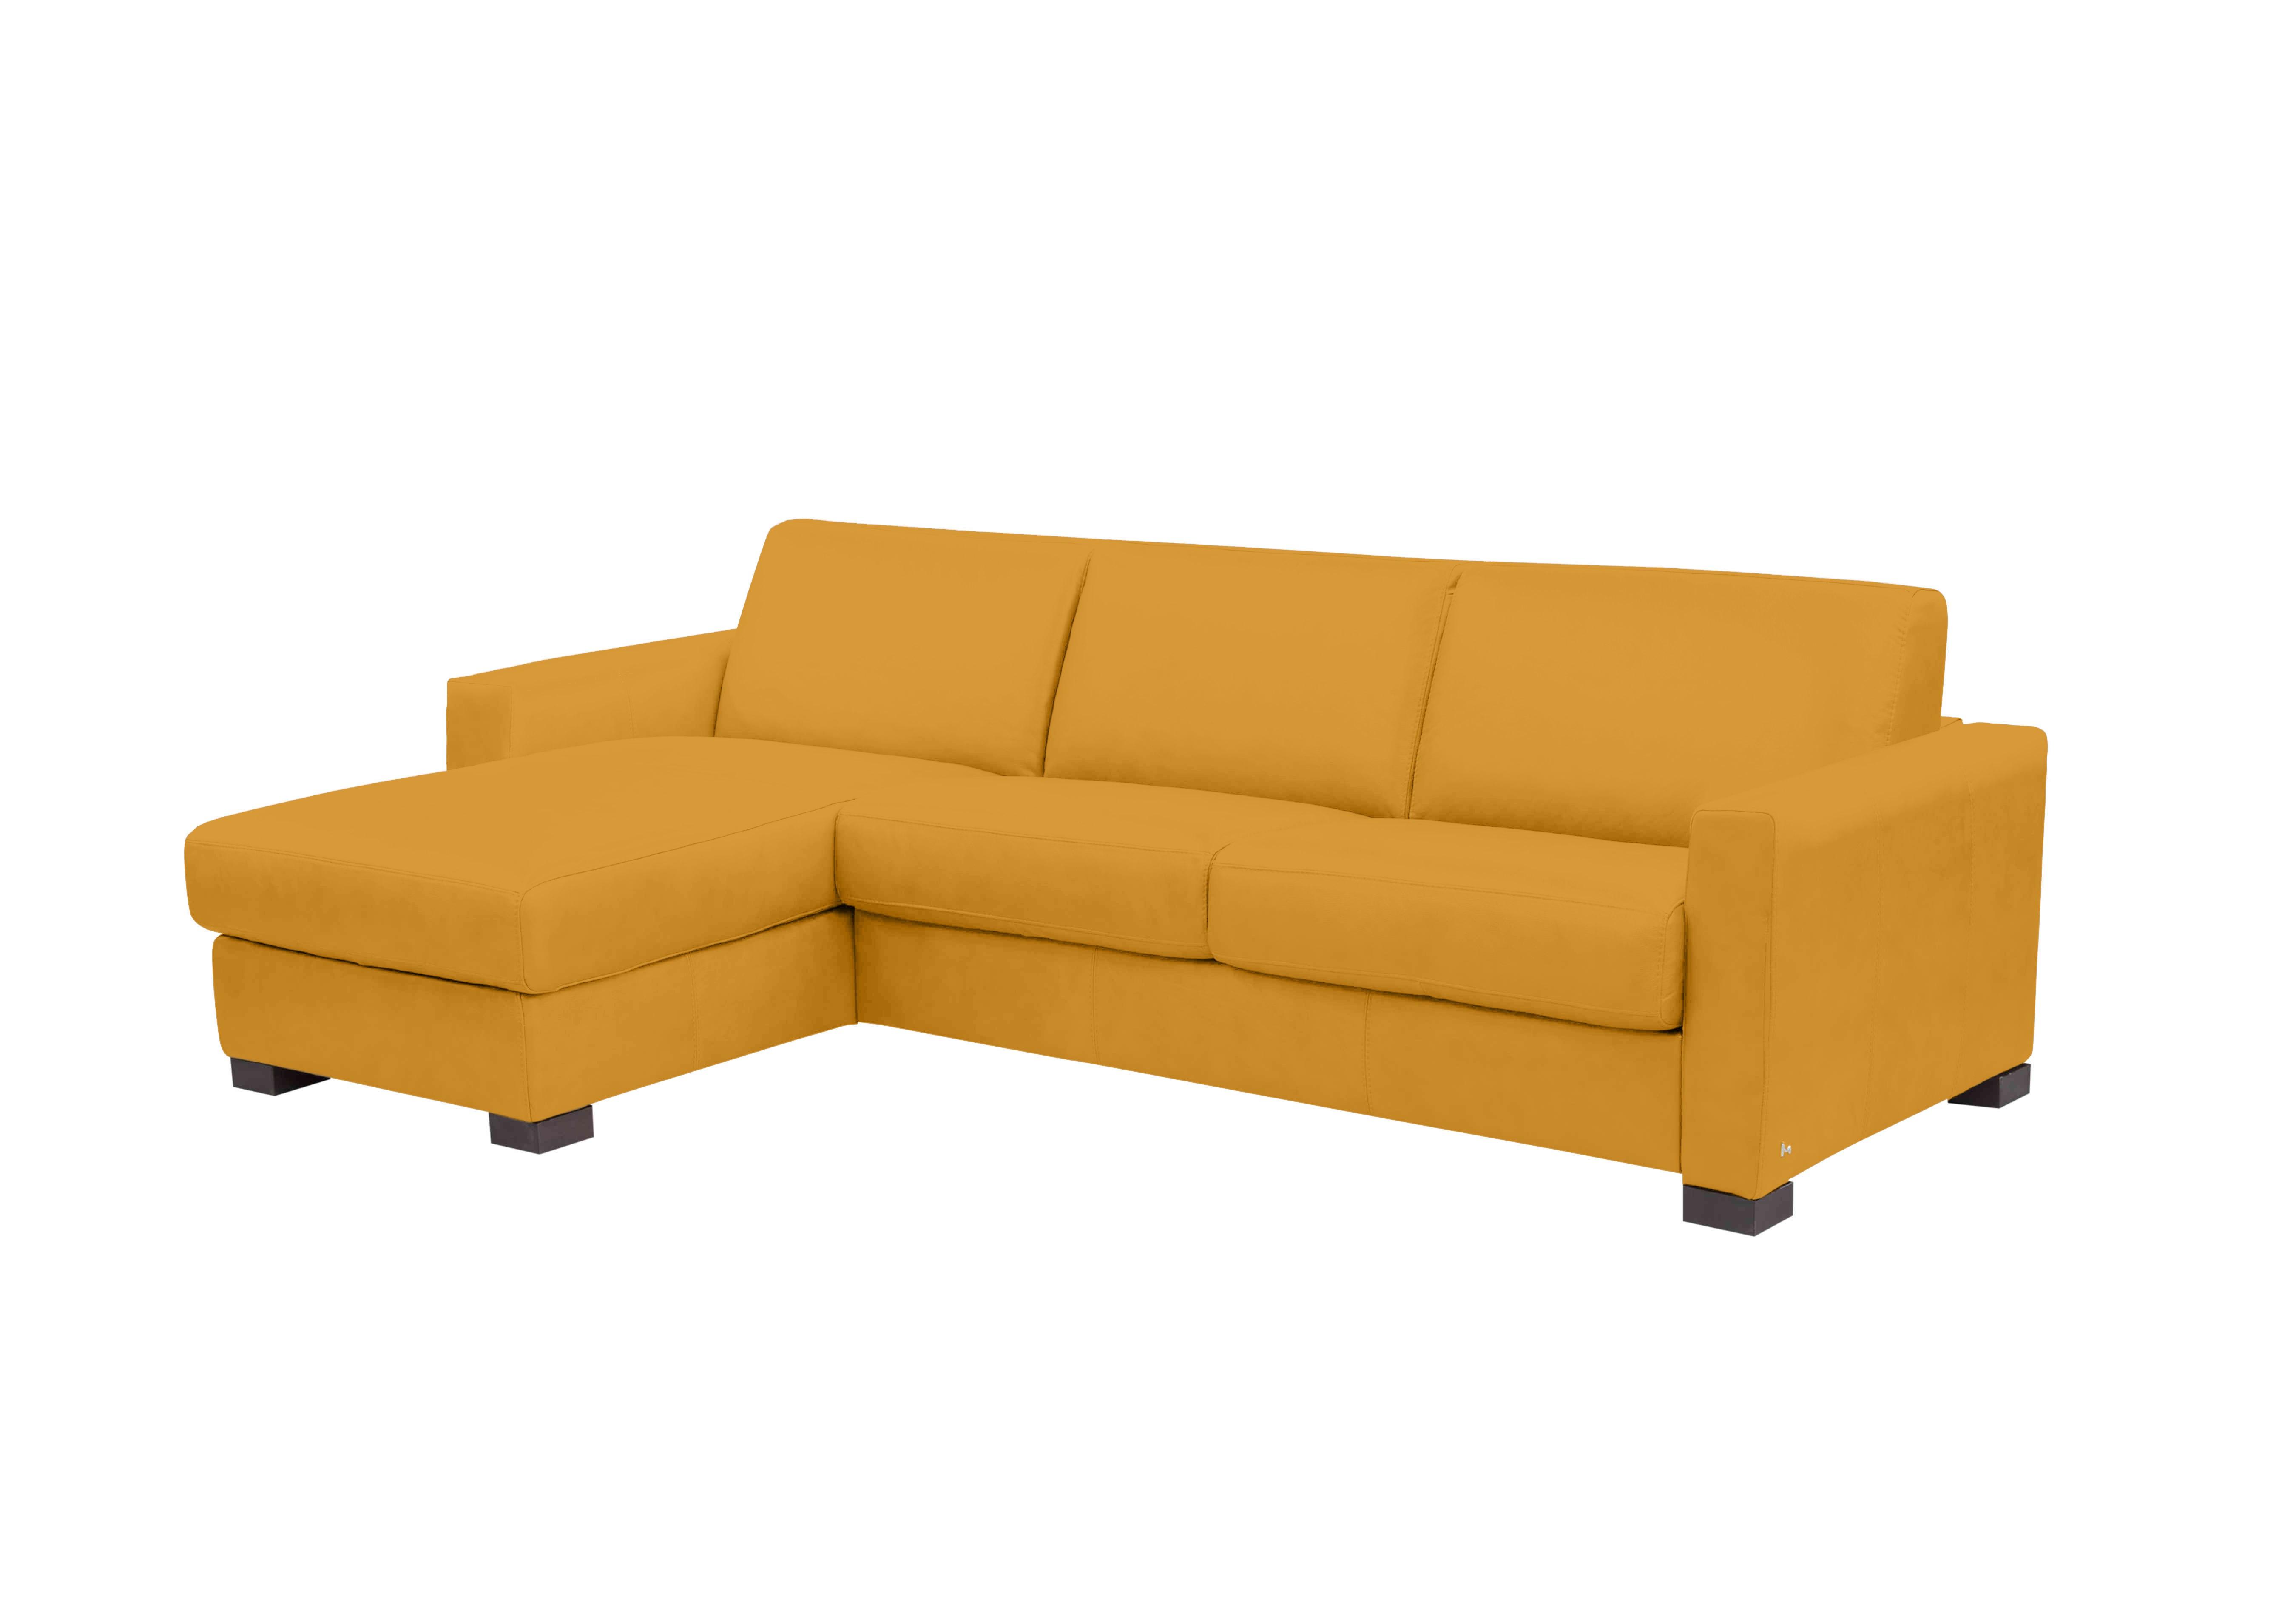 Alcova 3 Seater Leather Sofa Bed with Storage Chaise and Box Arms in Torello Senape 355 on Furniture Village